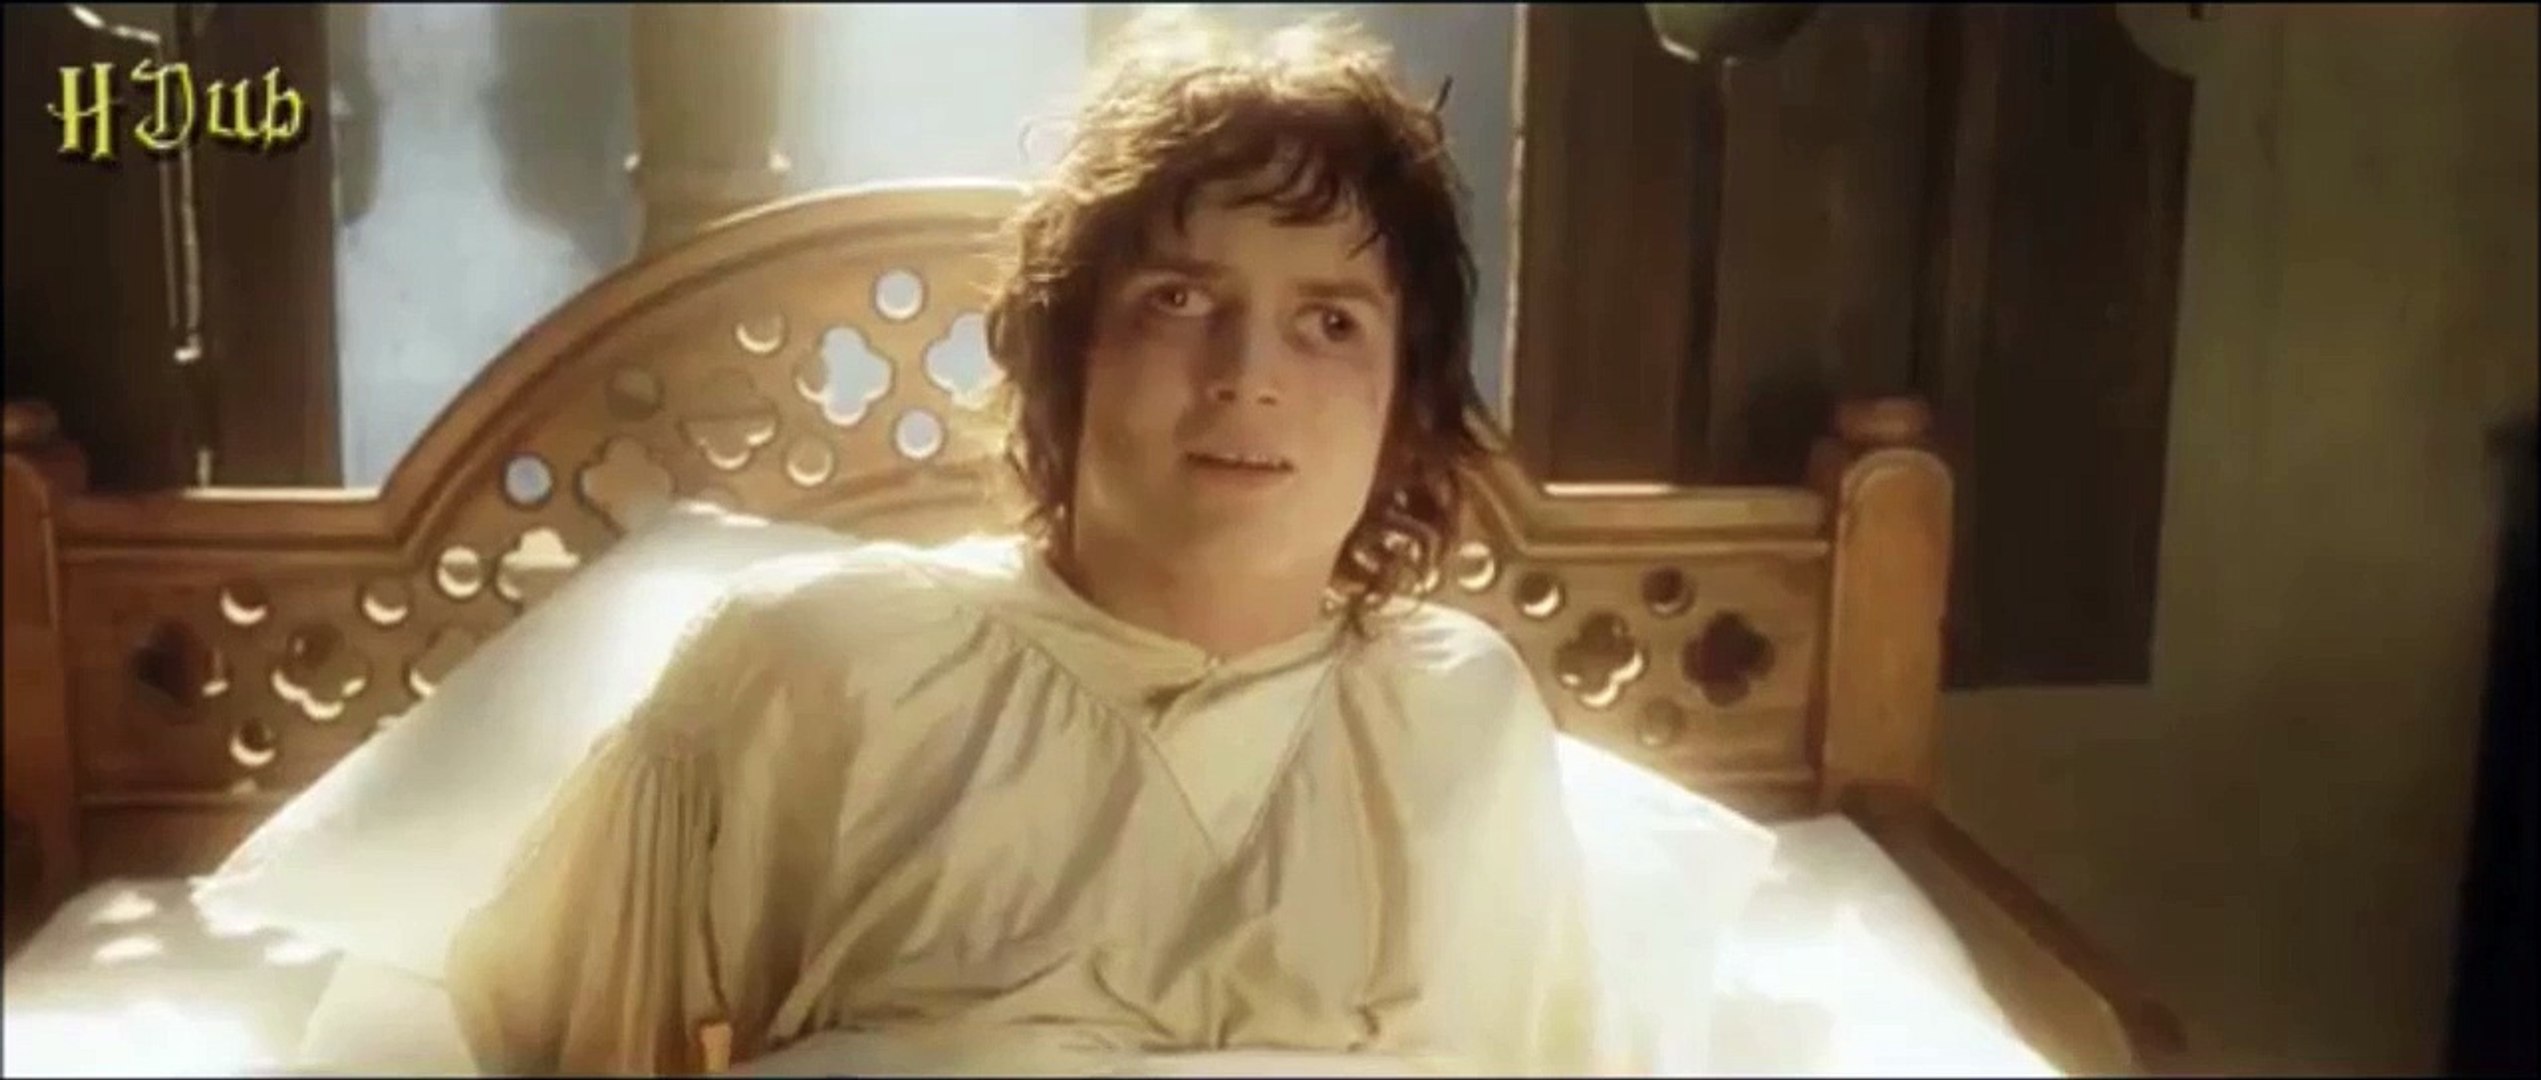 When Gandalf meets Frodo... The Lord of the rings Parody - Vidéo Dailymotion